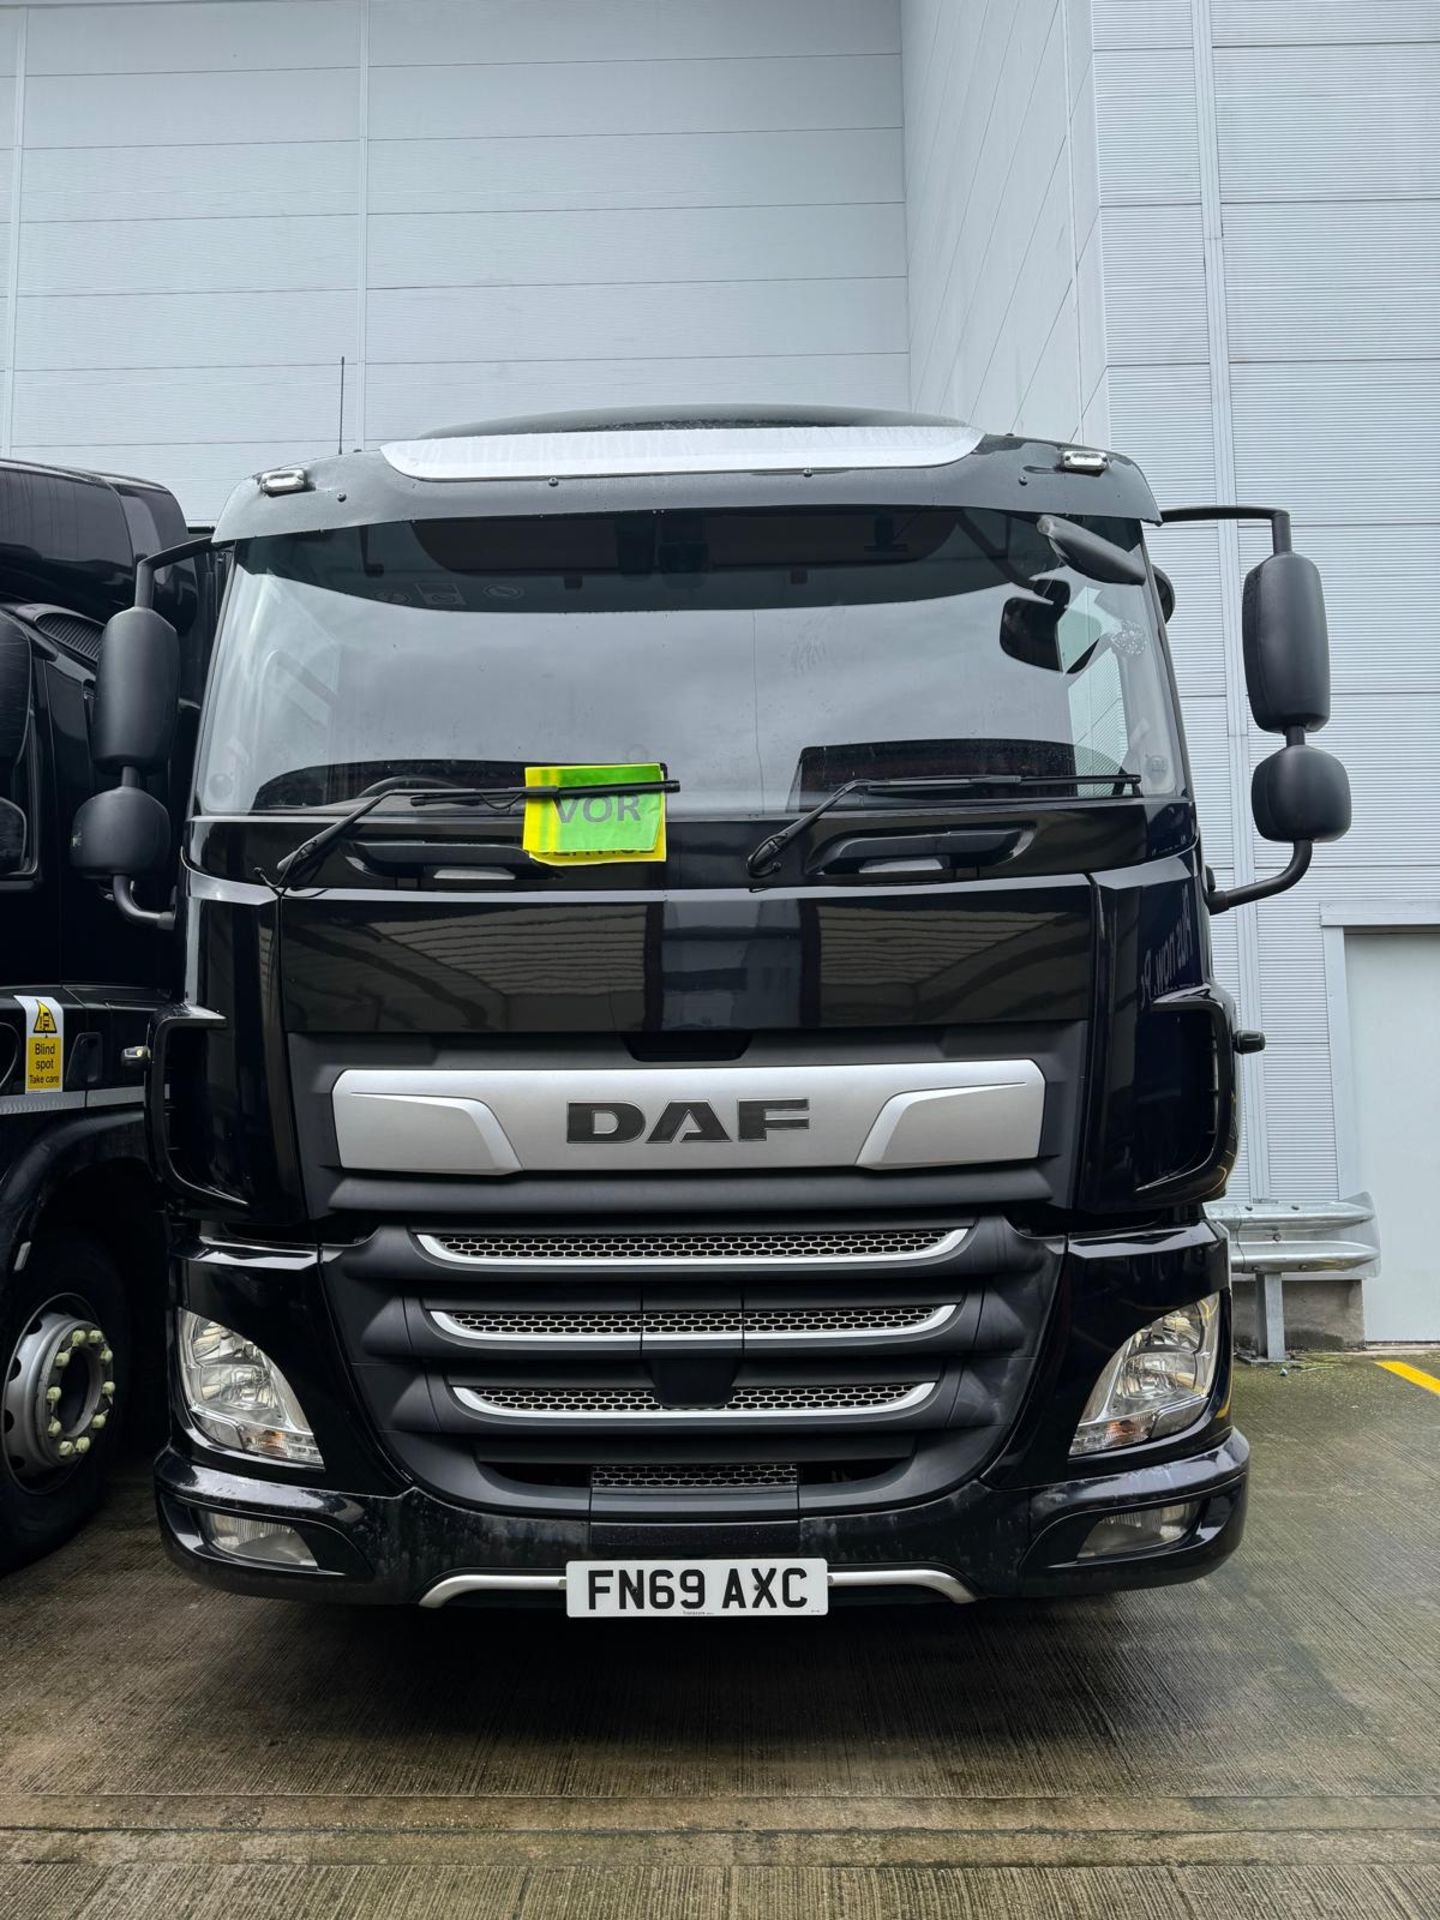 2019, DAF CF 260 FA (Ex-Fleet Owned & Maintained) - FN69 AXC (18 Ton Rigid Truck with Tail Lift)